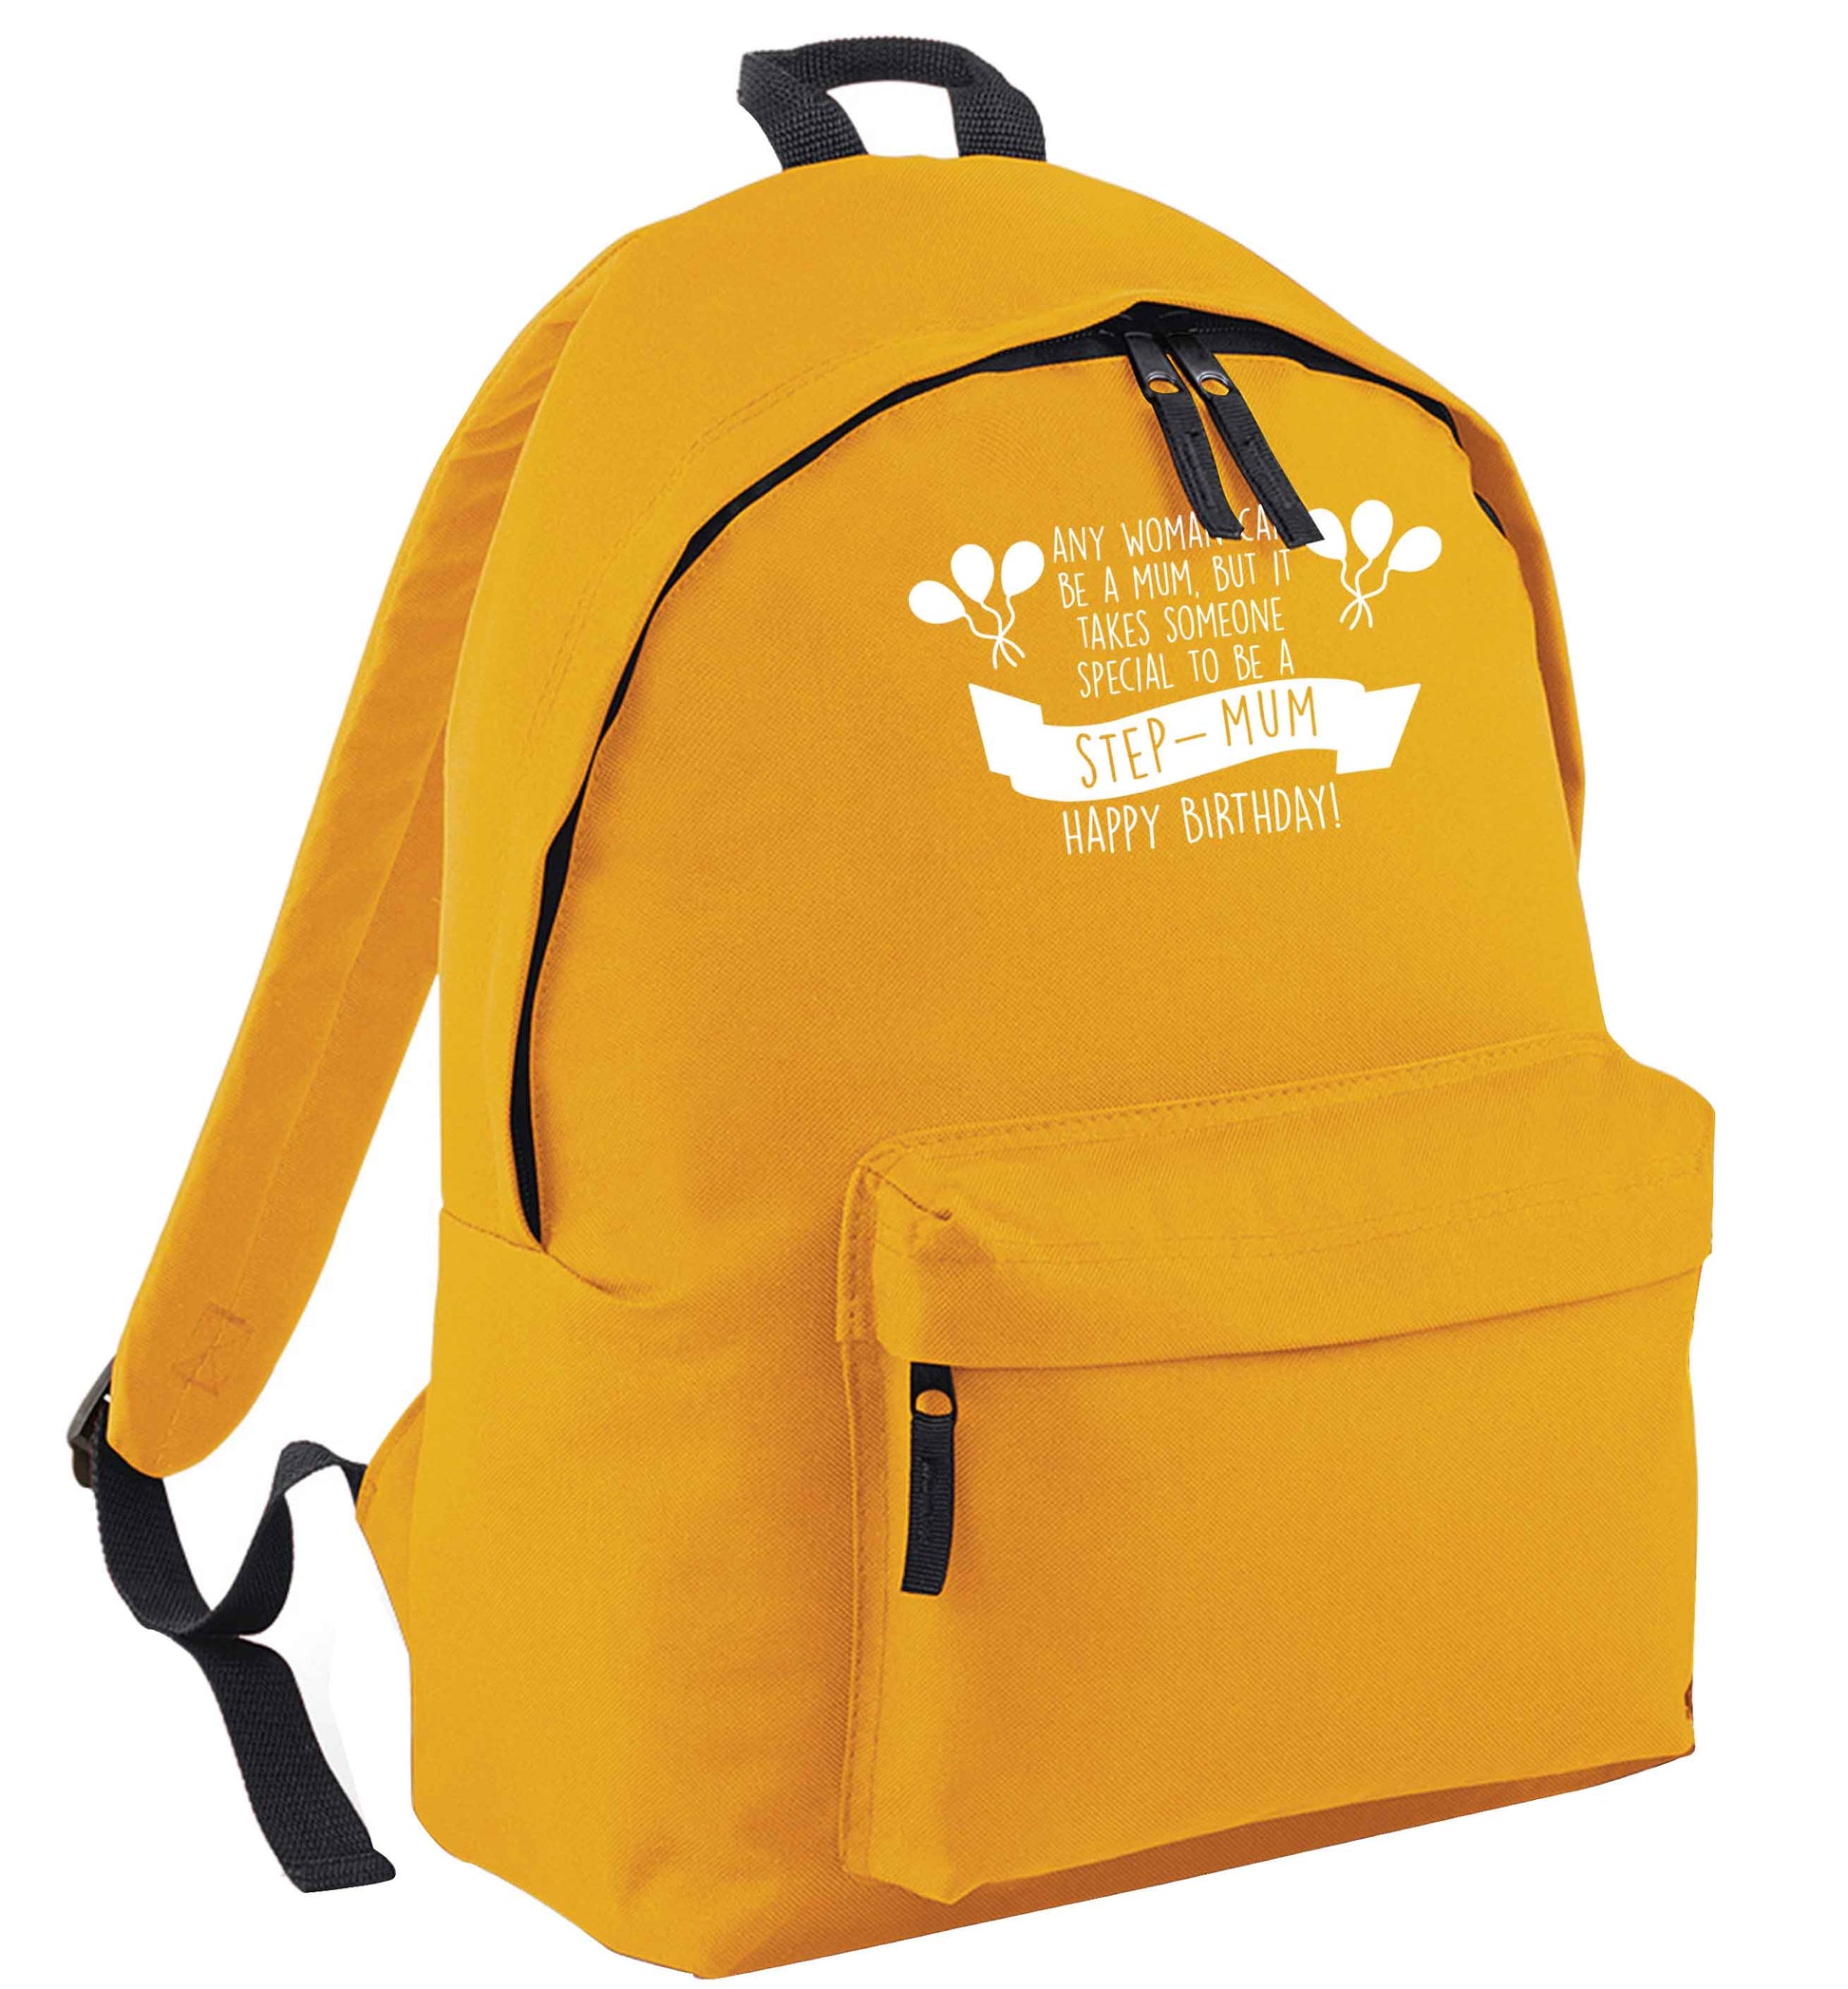 Takes someone special to be a step-mum, happy birthday! mustard adults backpack